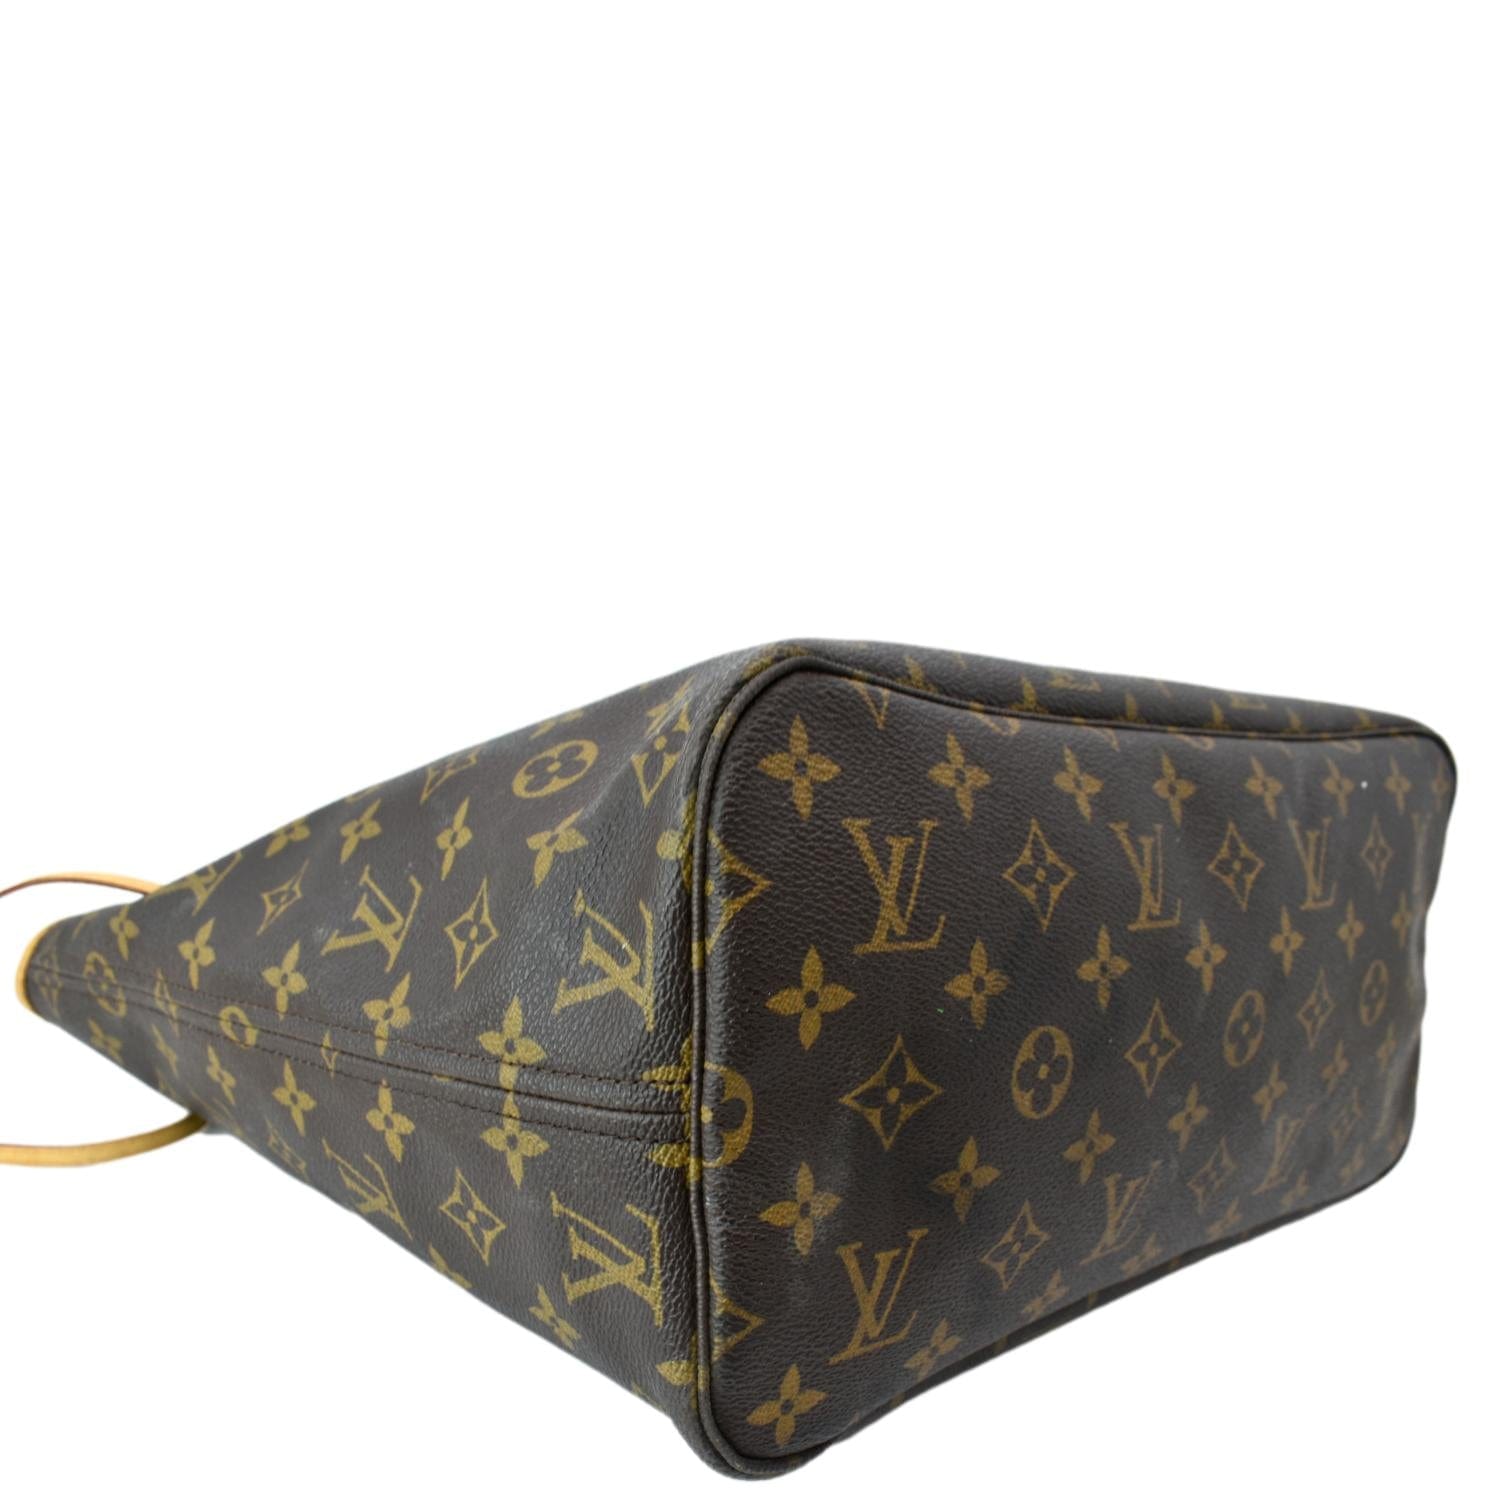 Neverfull cloth tote